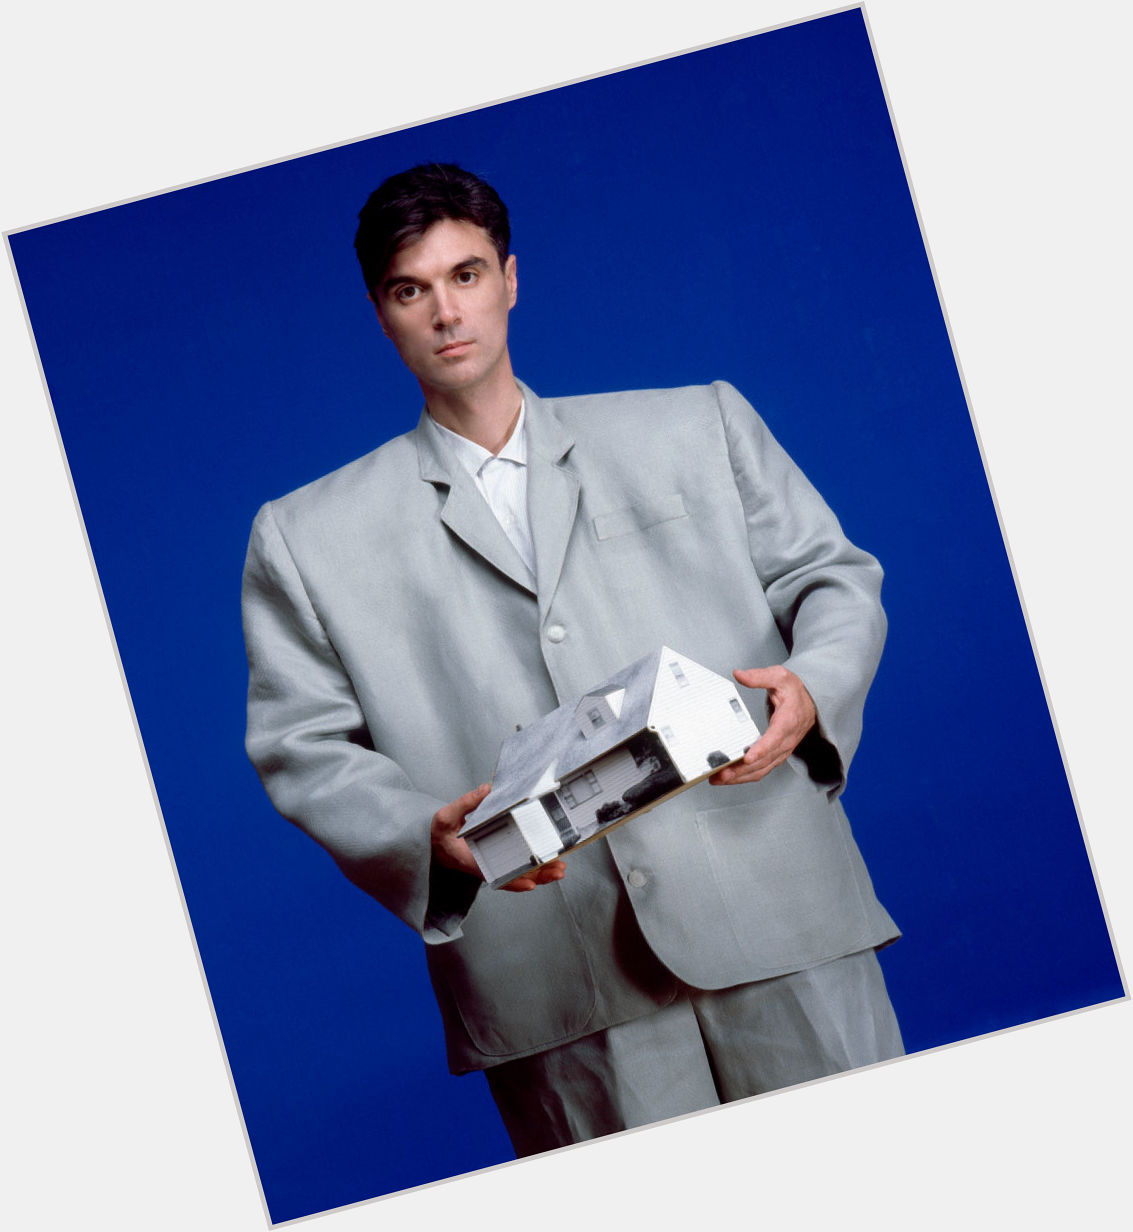 This is what we call a birthday suit.

Happy 70th Birthday, David Byrne! 